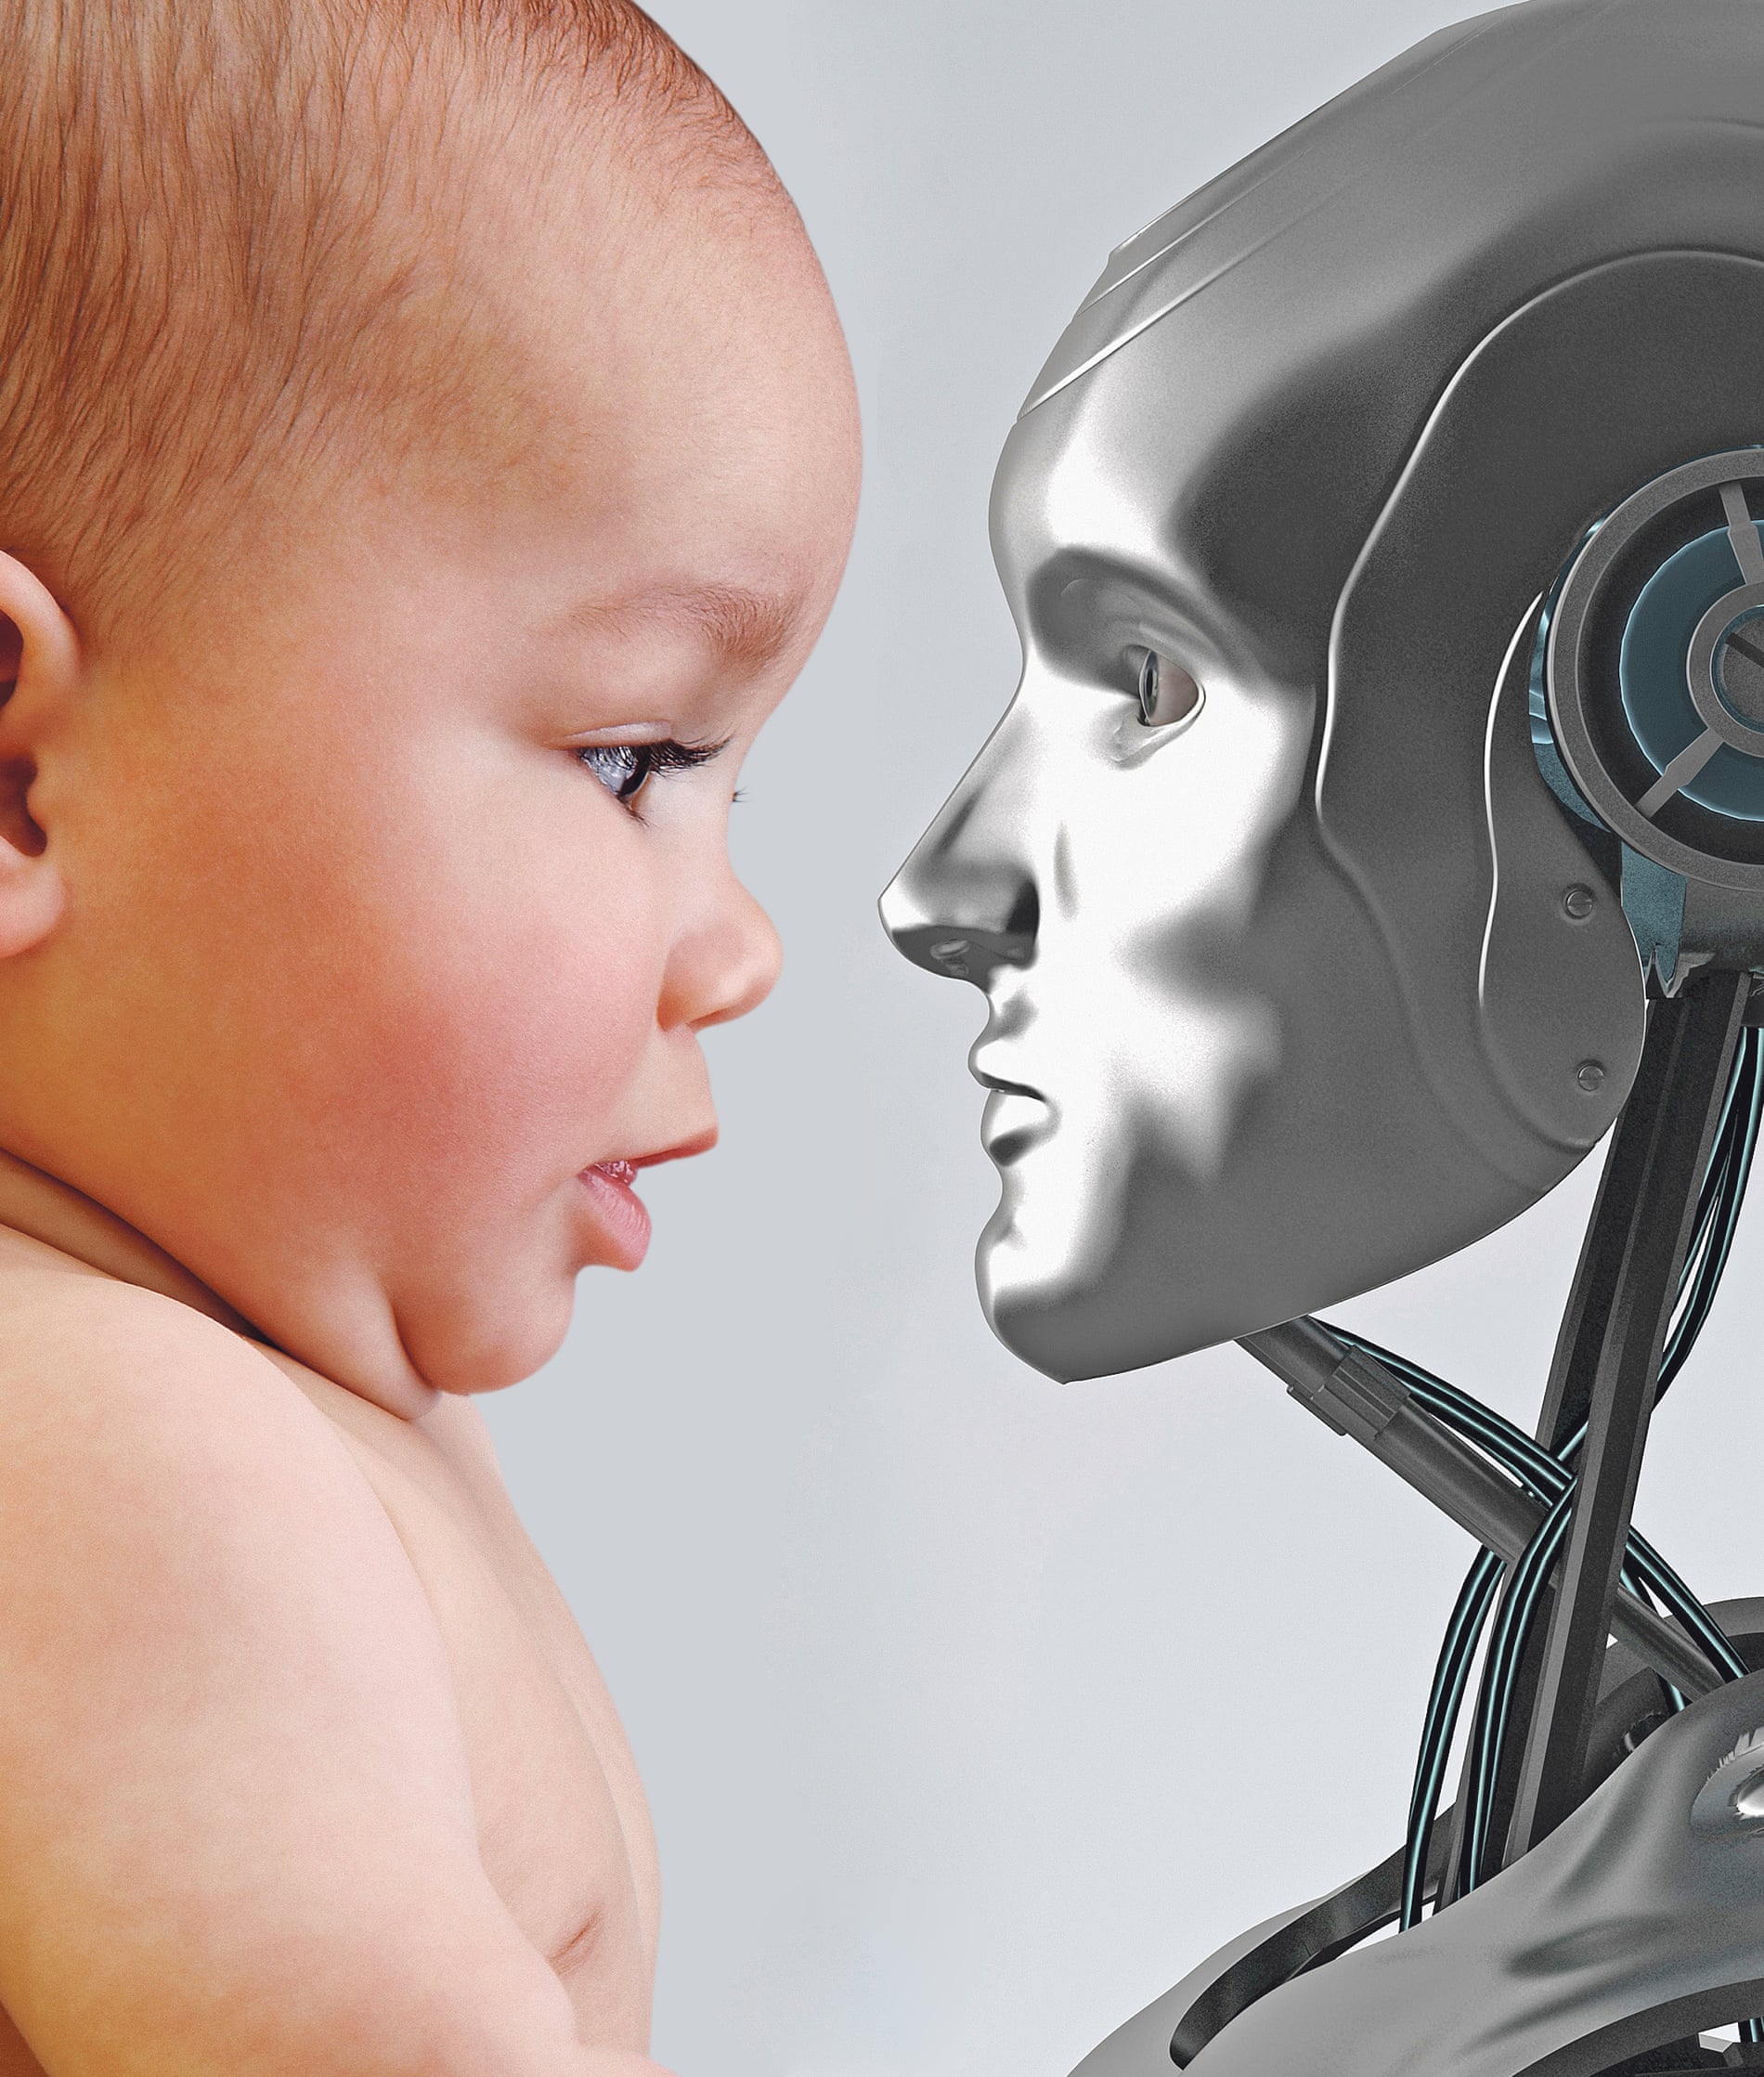 illustration: baby and robot face-to-face